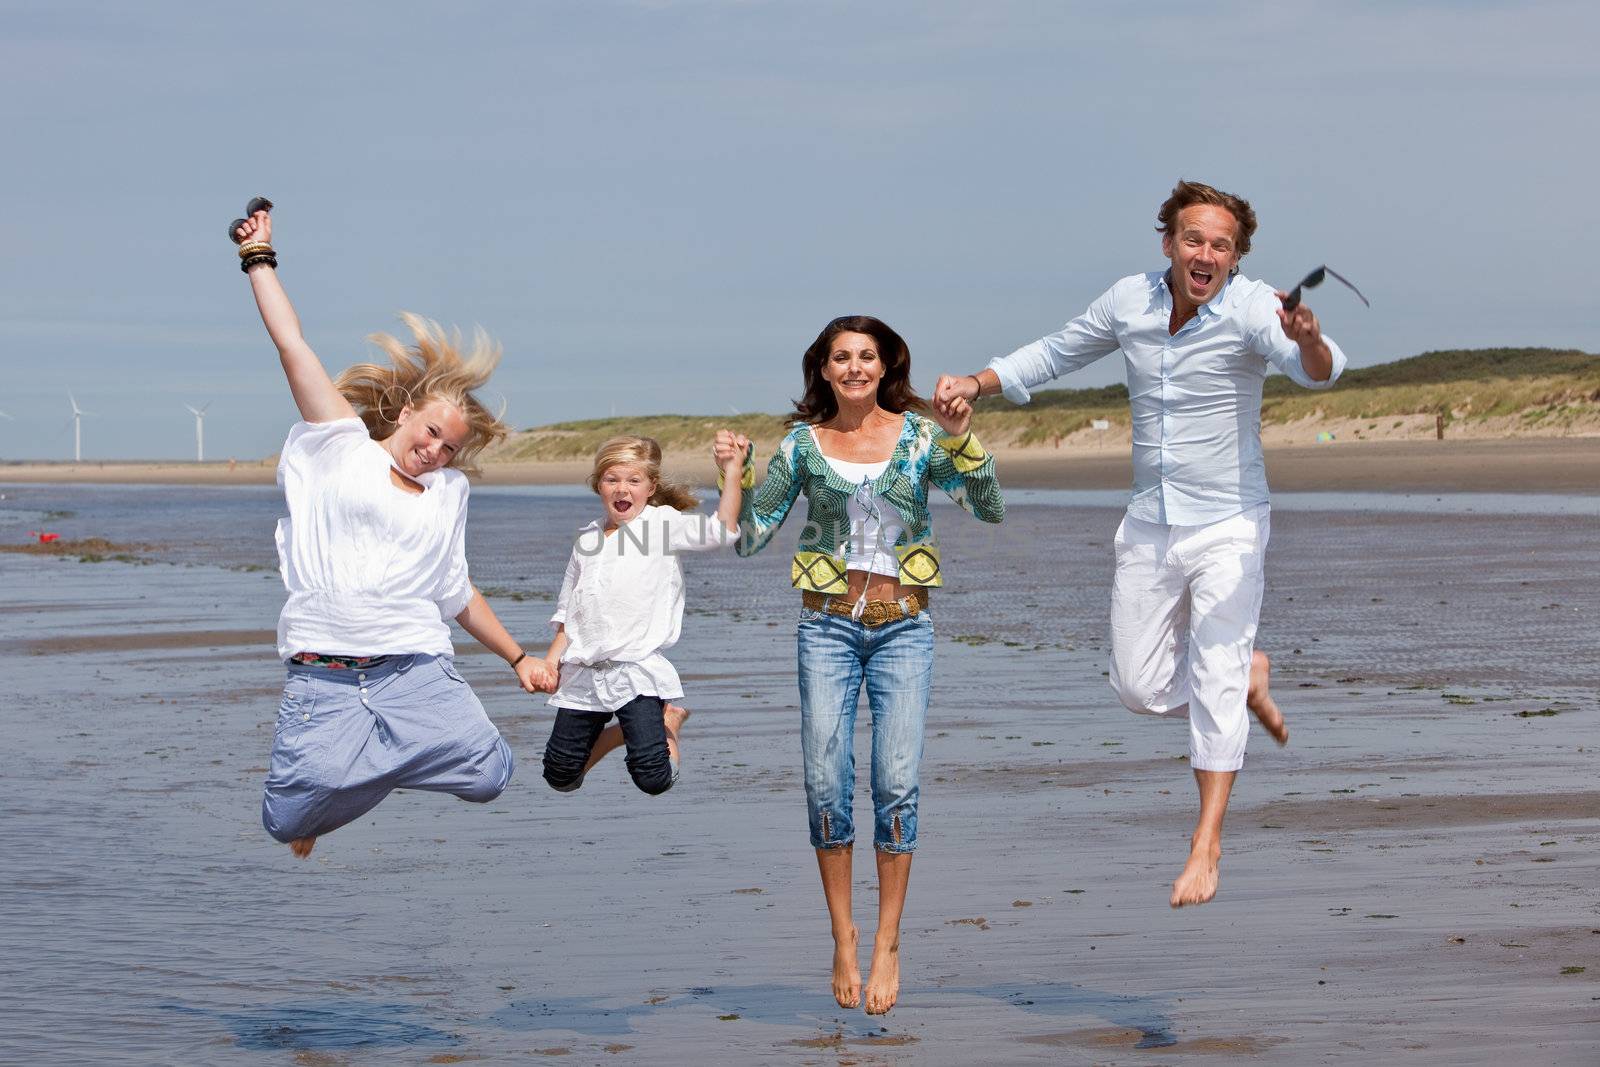 Jumping family by Fotosmurf